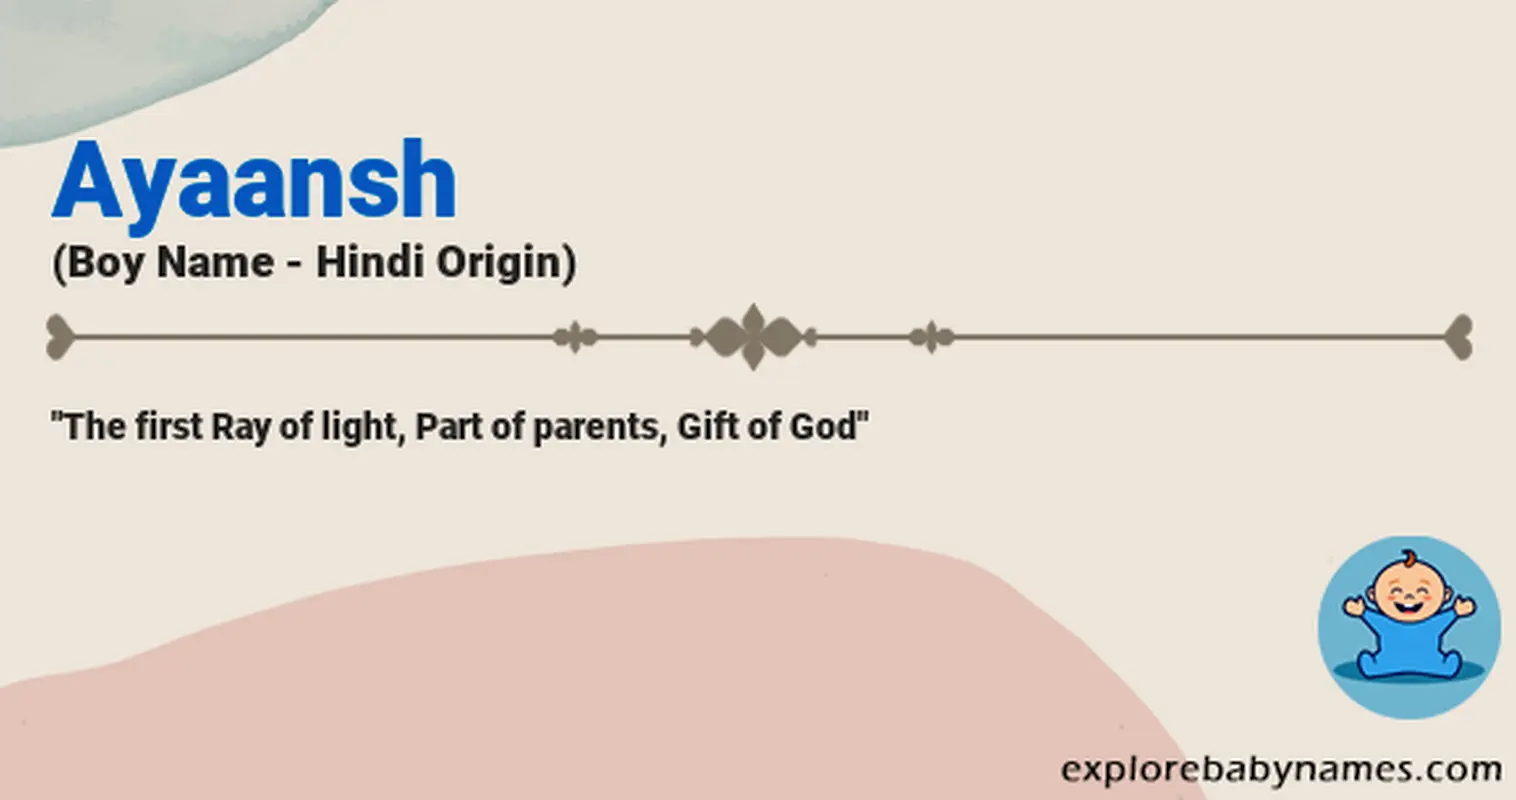 Meaning of Ayaansh